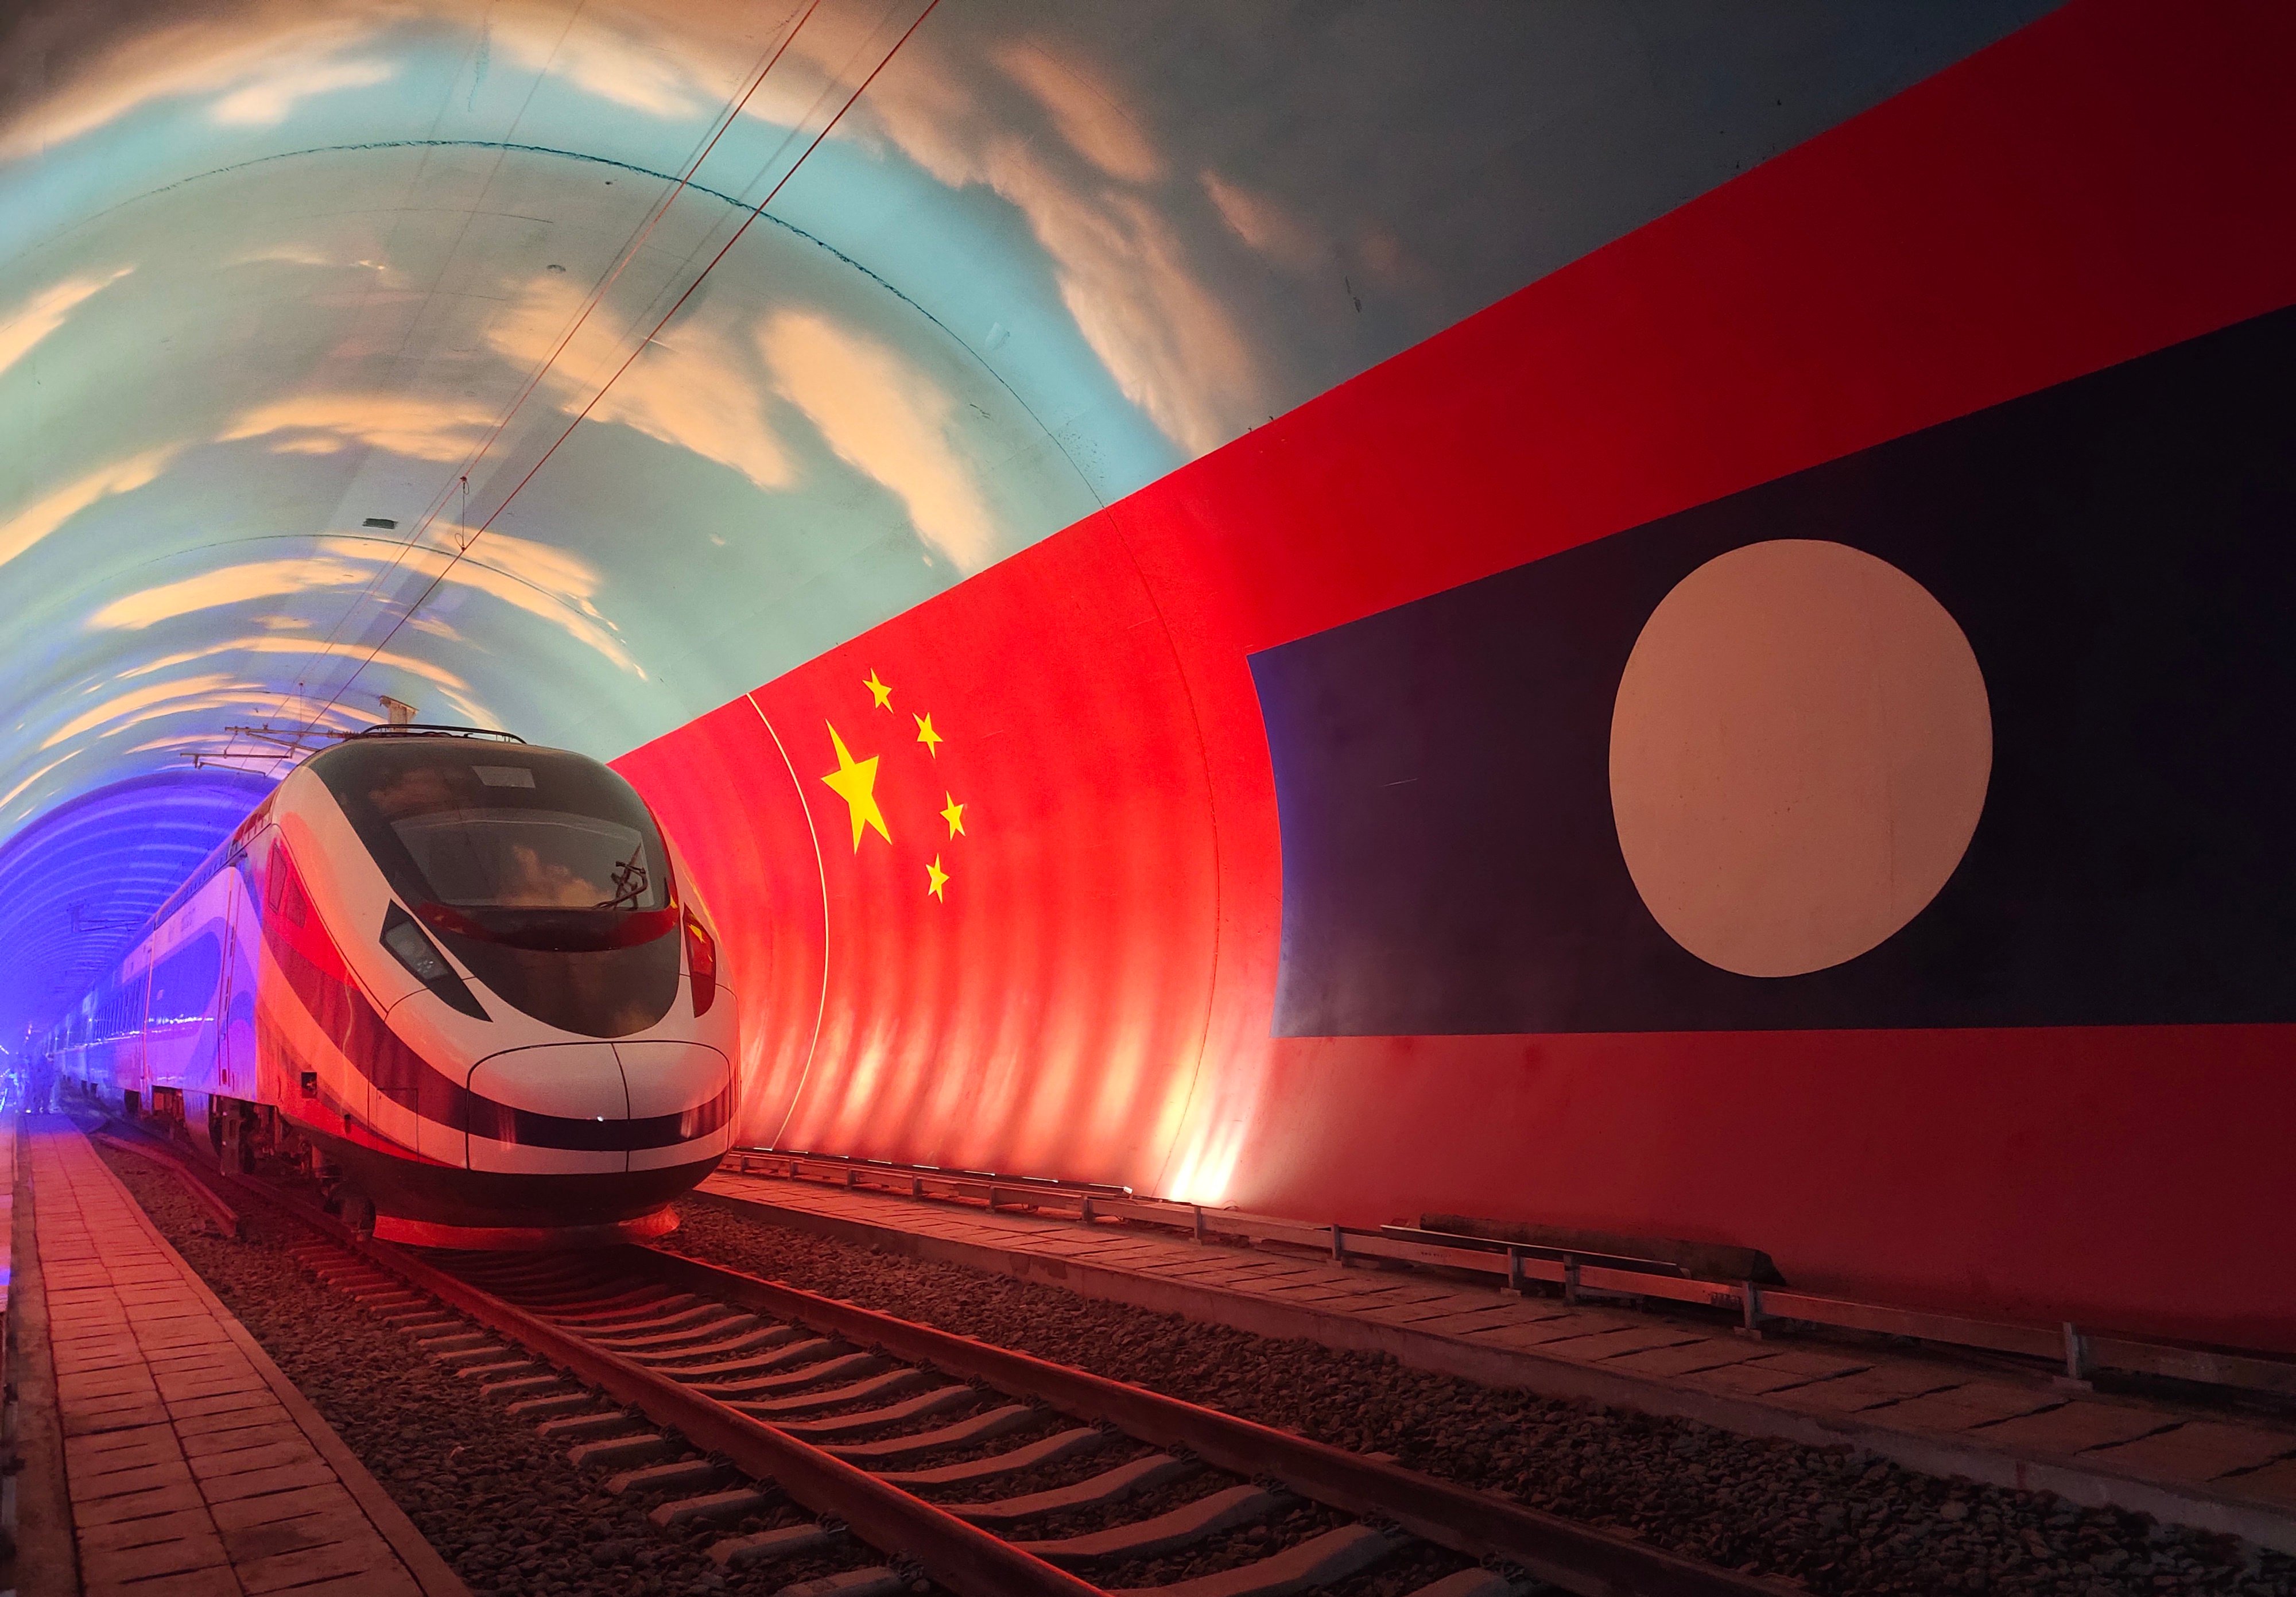 The Lane Xang electric multiple unit train passes by the China-Laos borderline inside a tunnel in October 2021. Photo: Xinhua